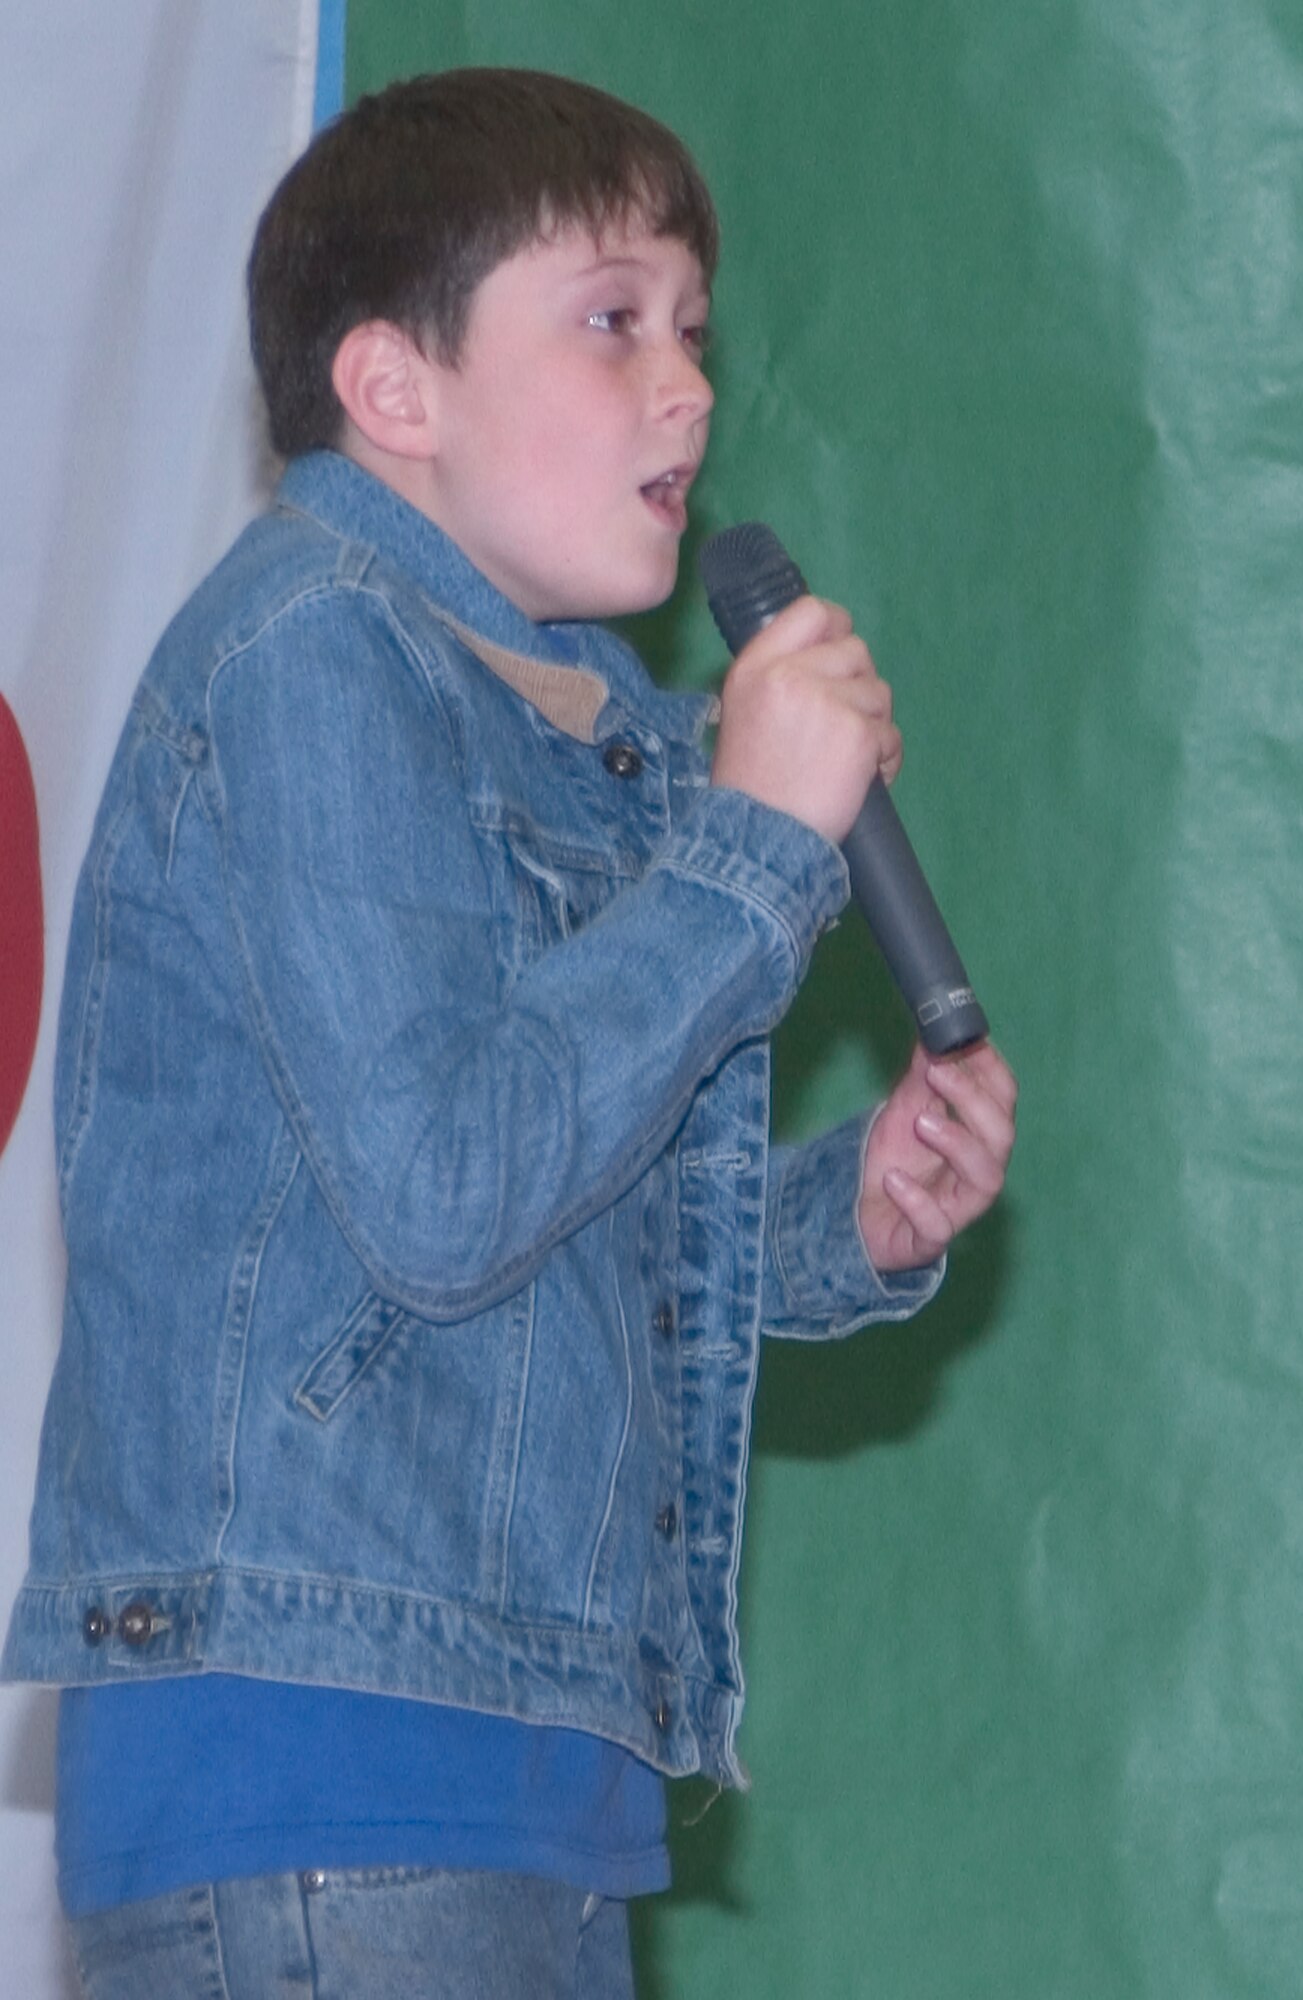 MISAWA AIR BASE, Japan --  Collin Lyon sings "Right Here Waiting" at the Misawa Youth Idol Competition held at the Lunney Youth Center May 5. Collin was the male winner of the competion and received a $100 Army and Air Force Exchange Service gift certificate. (U.S. Air Force photo by Airman 1st Class Eric Harris) 